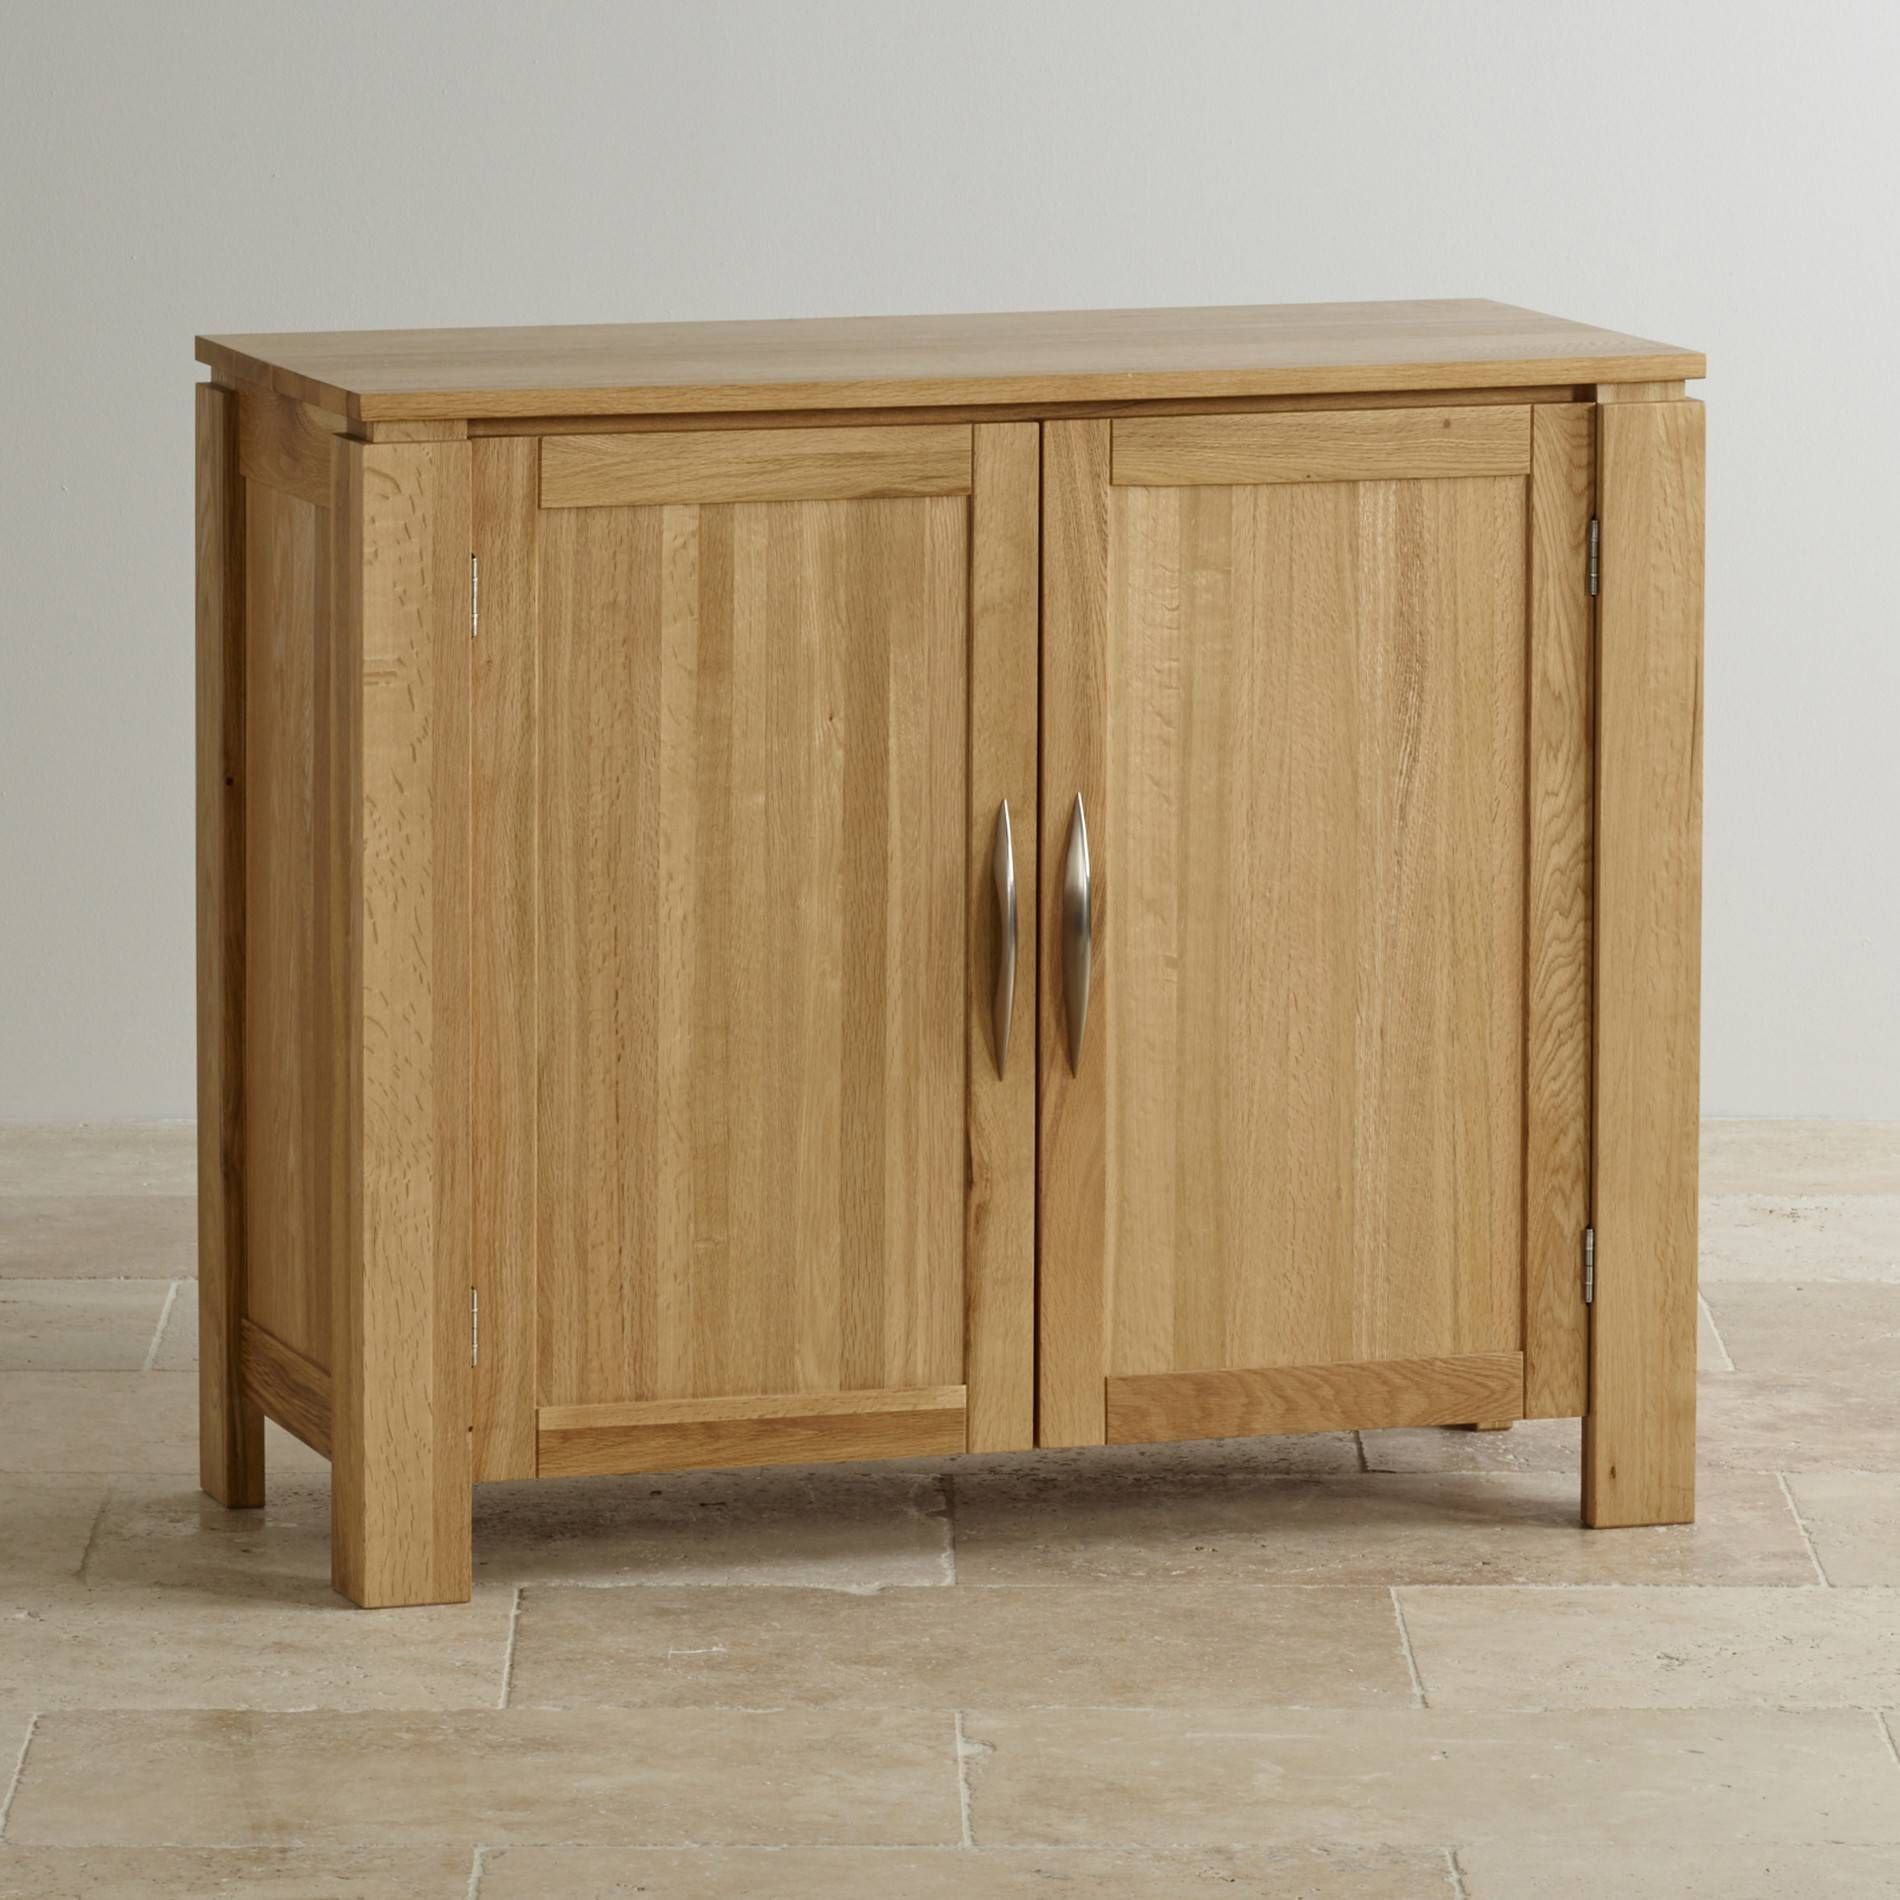 Galway Small Sideboard In Natural Solid Oak | Oak Furniture Land With Oak Effect Corner Tv Stand (View 14 of 15)